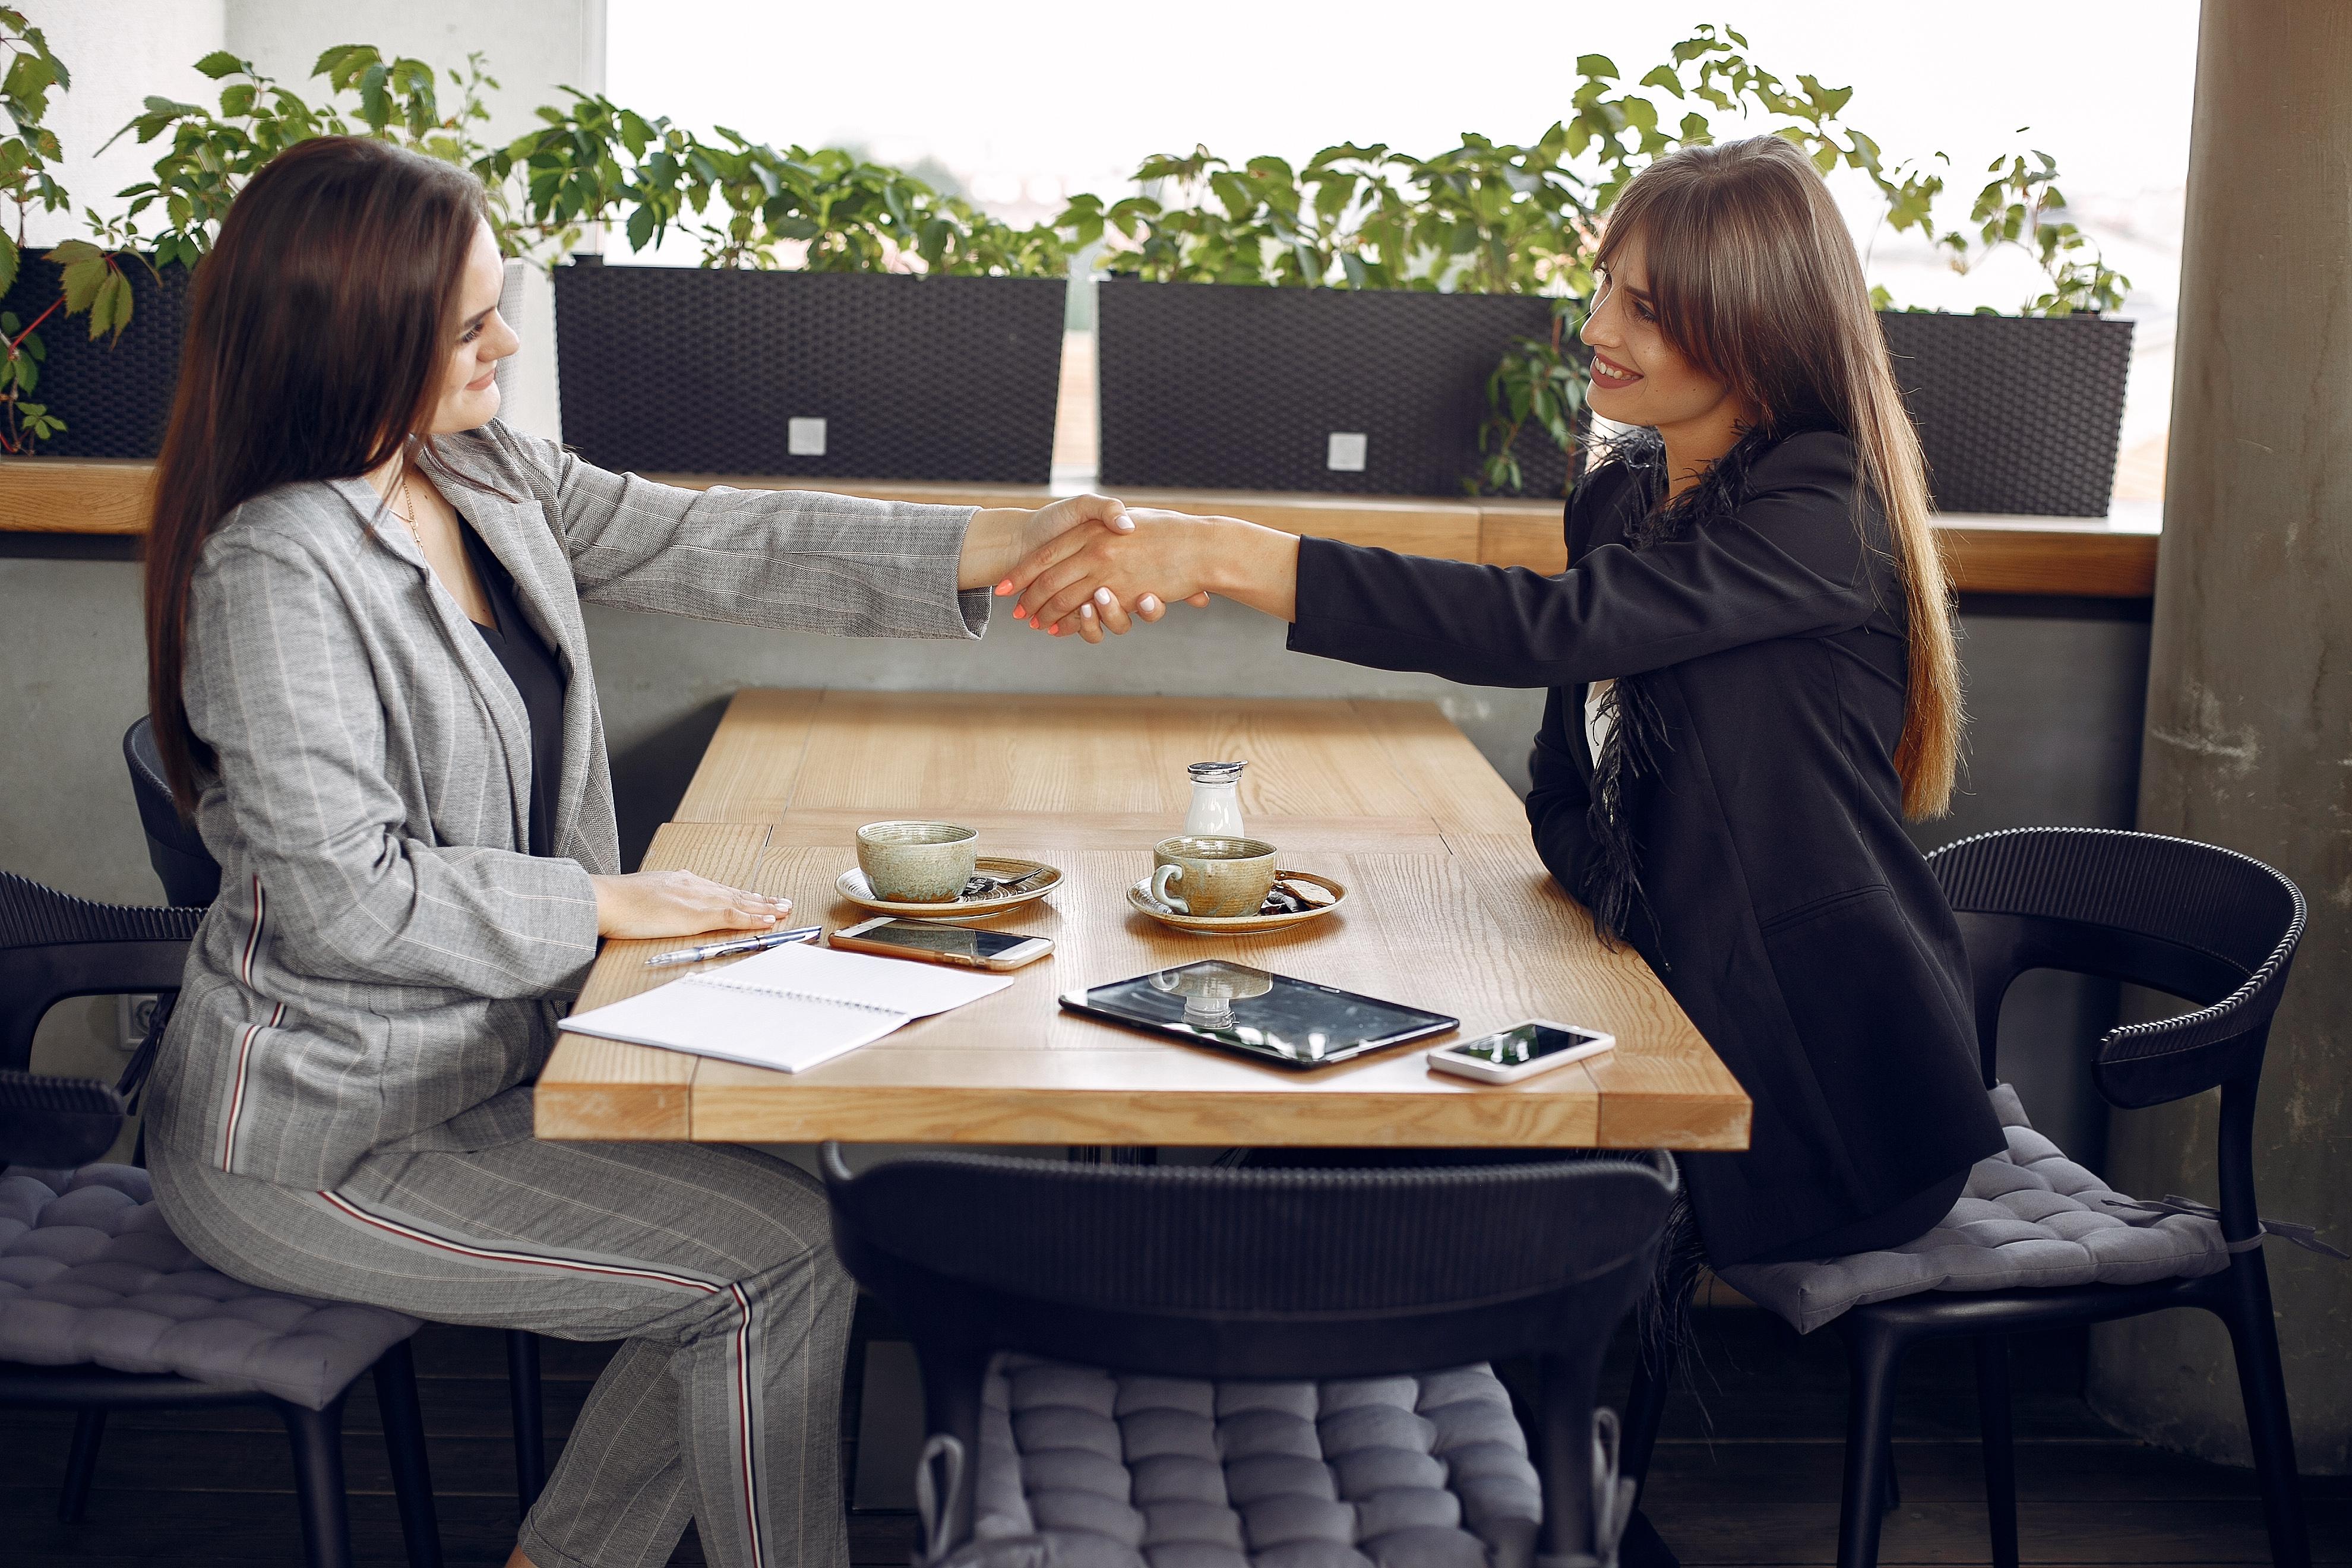 Establishing Customer Trust: Tips to Drive Sales Through Better Client Relations